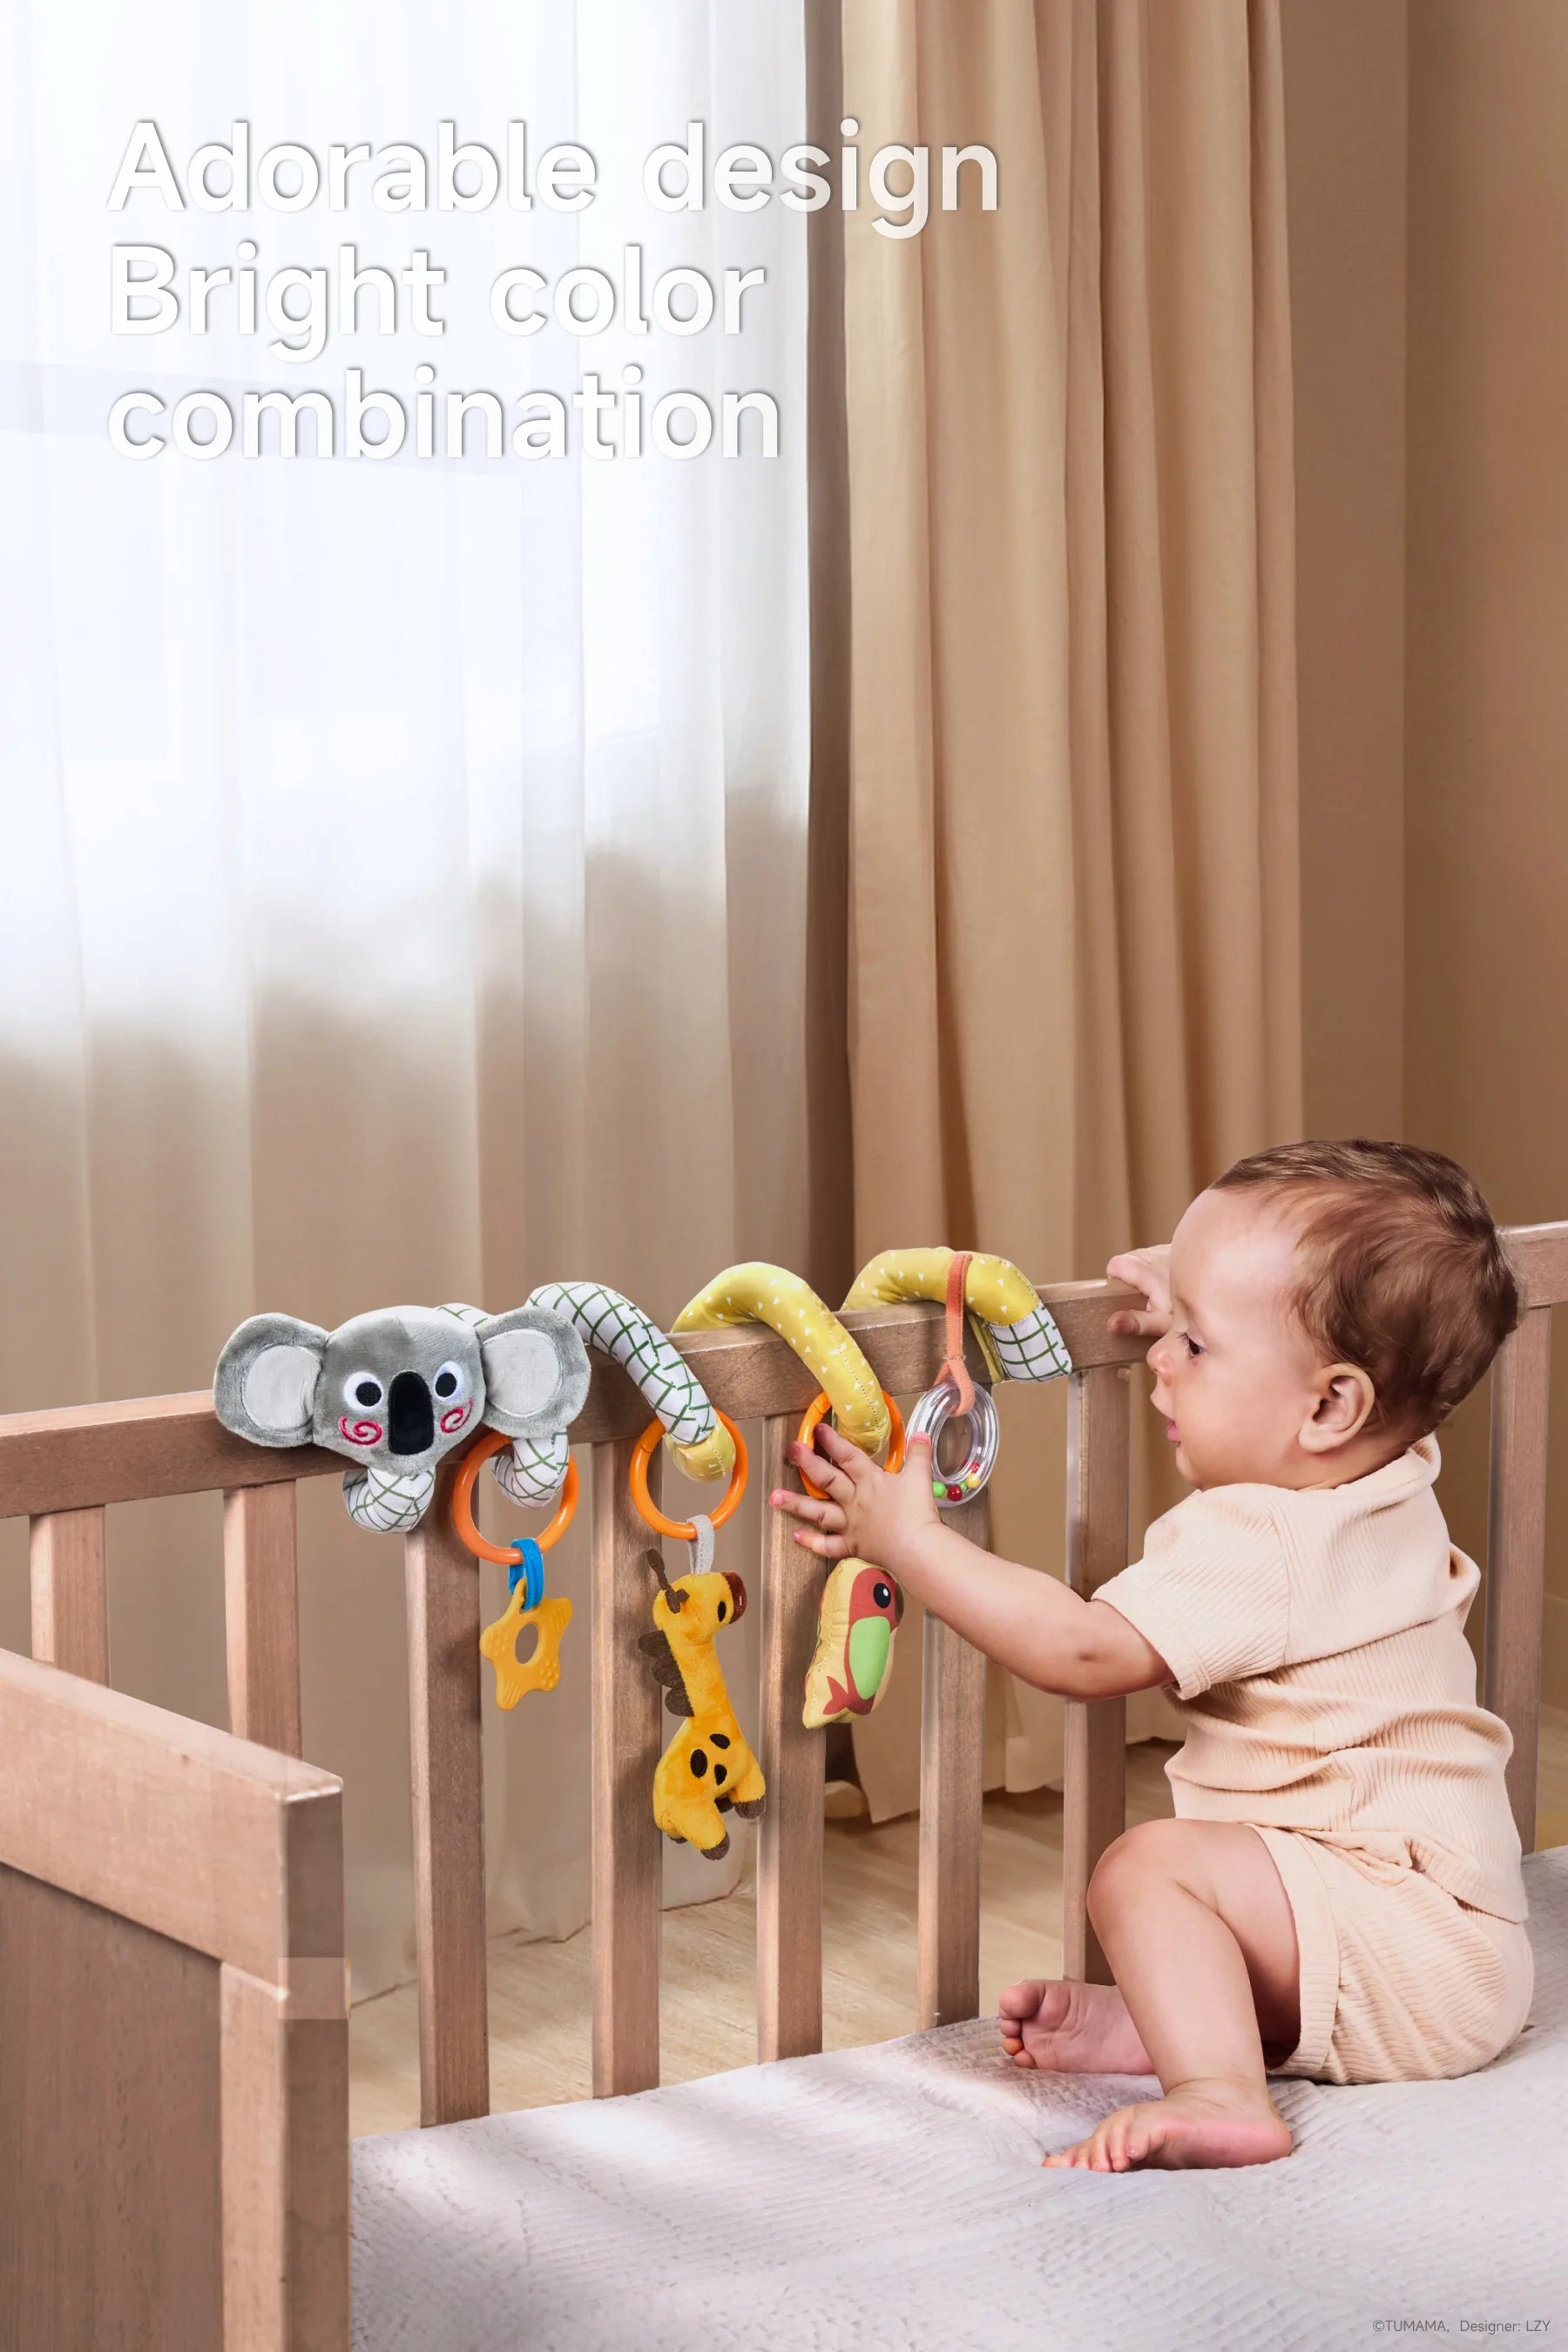 A baby in a stroller playing with a koala giraffe bird arch baby toy